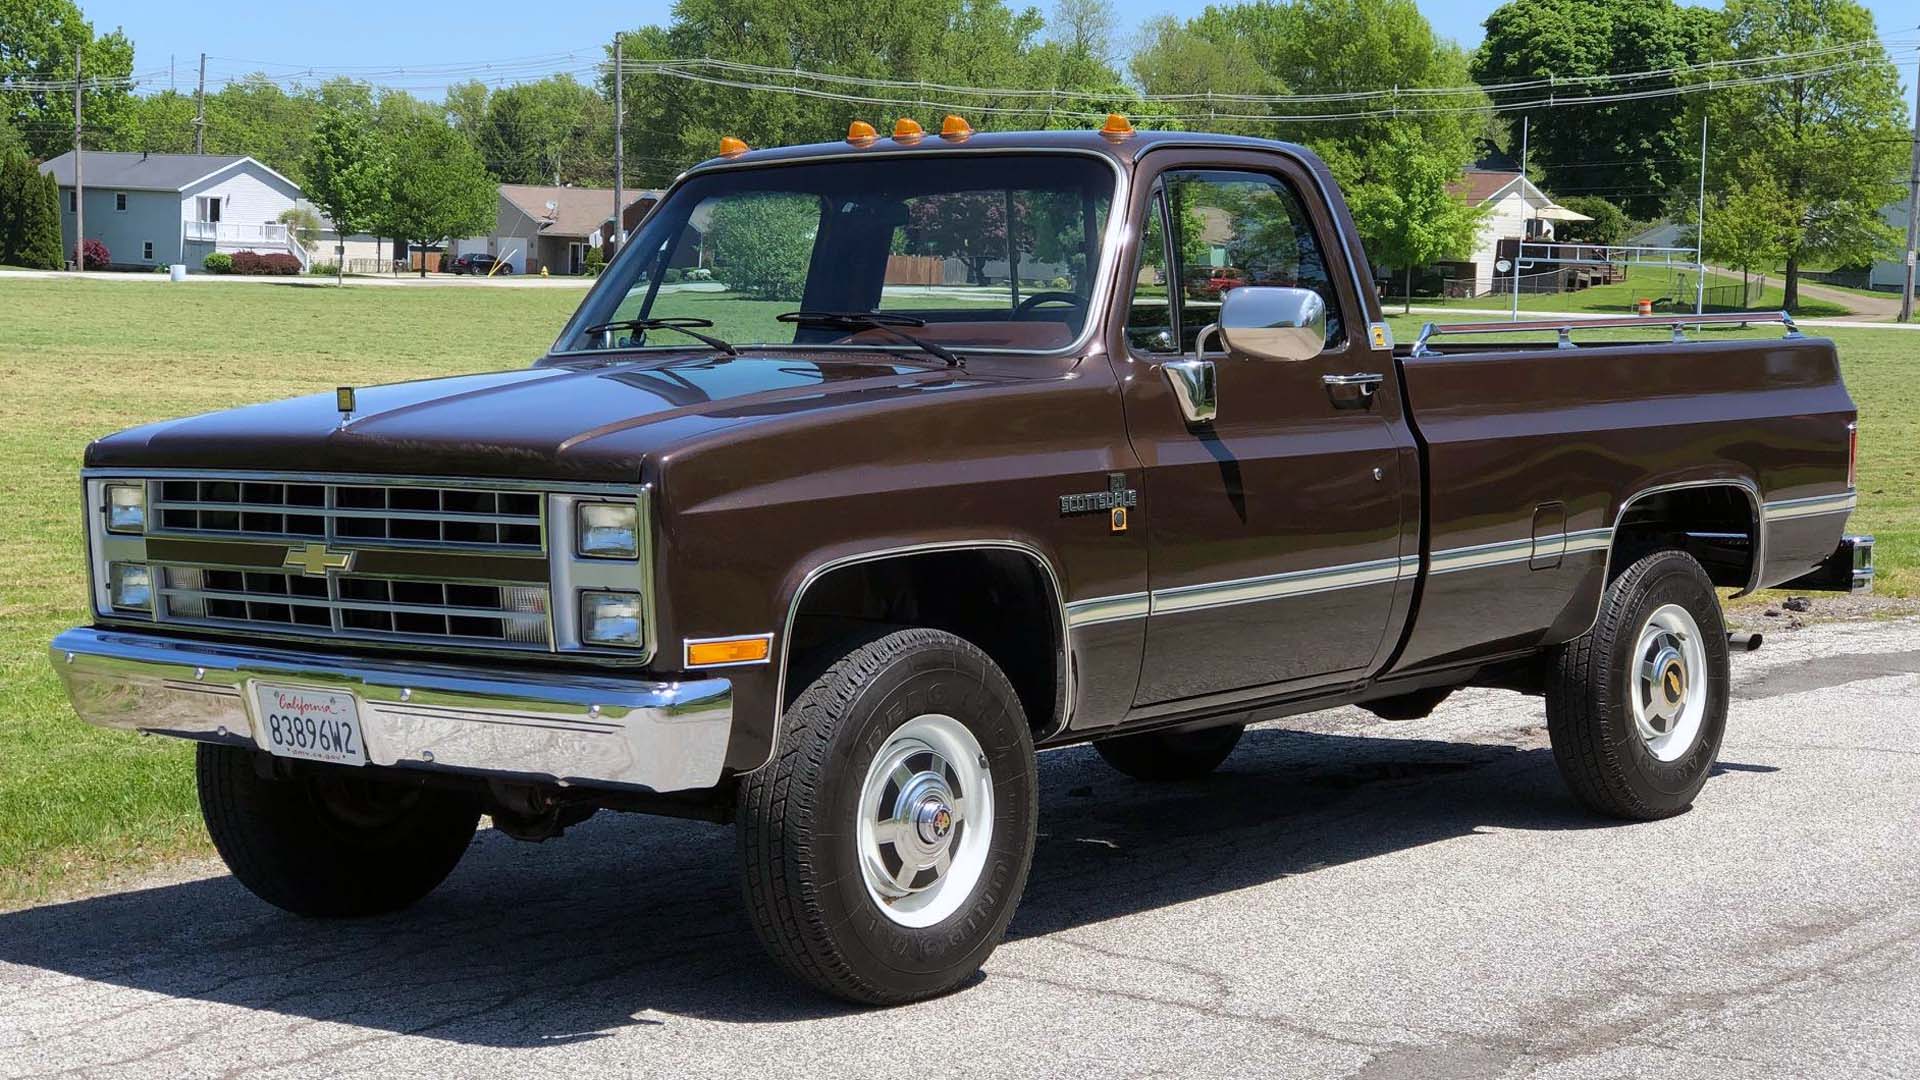 Bidding War Erupts Over Low Mile 1985 Chevy Square Body